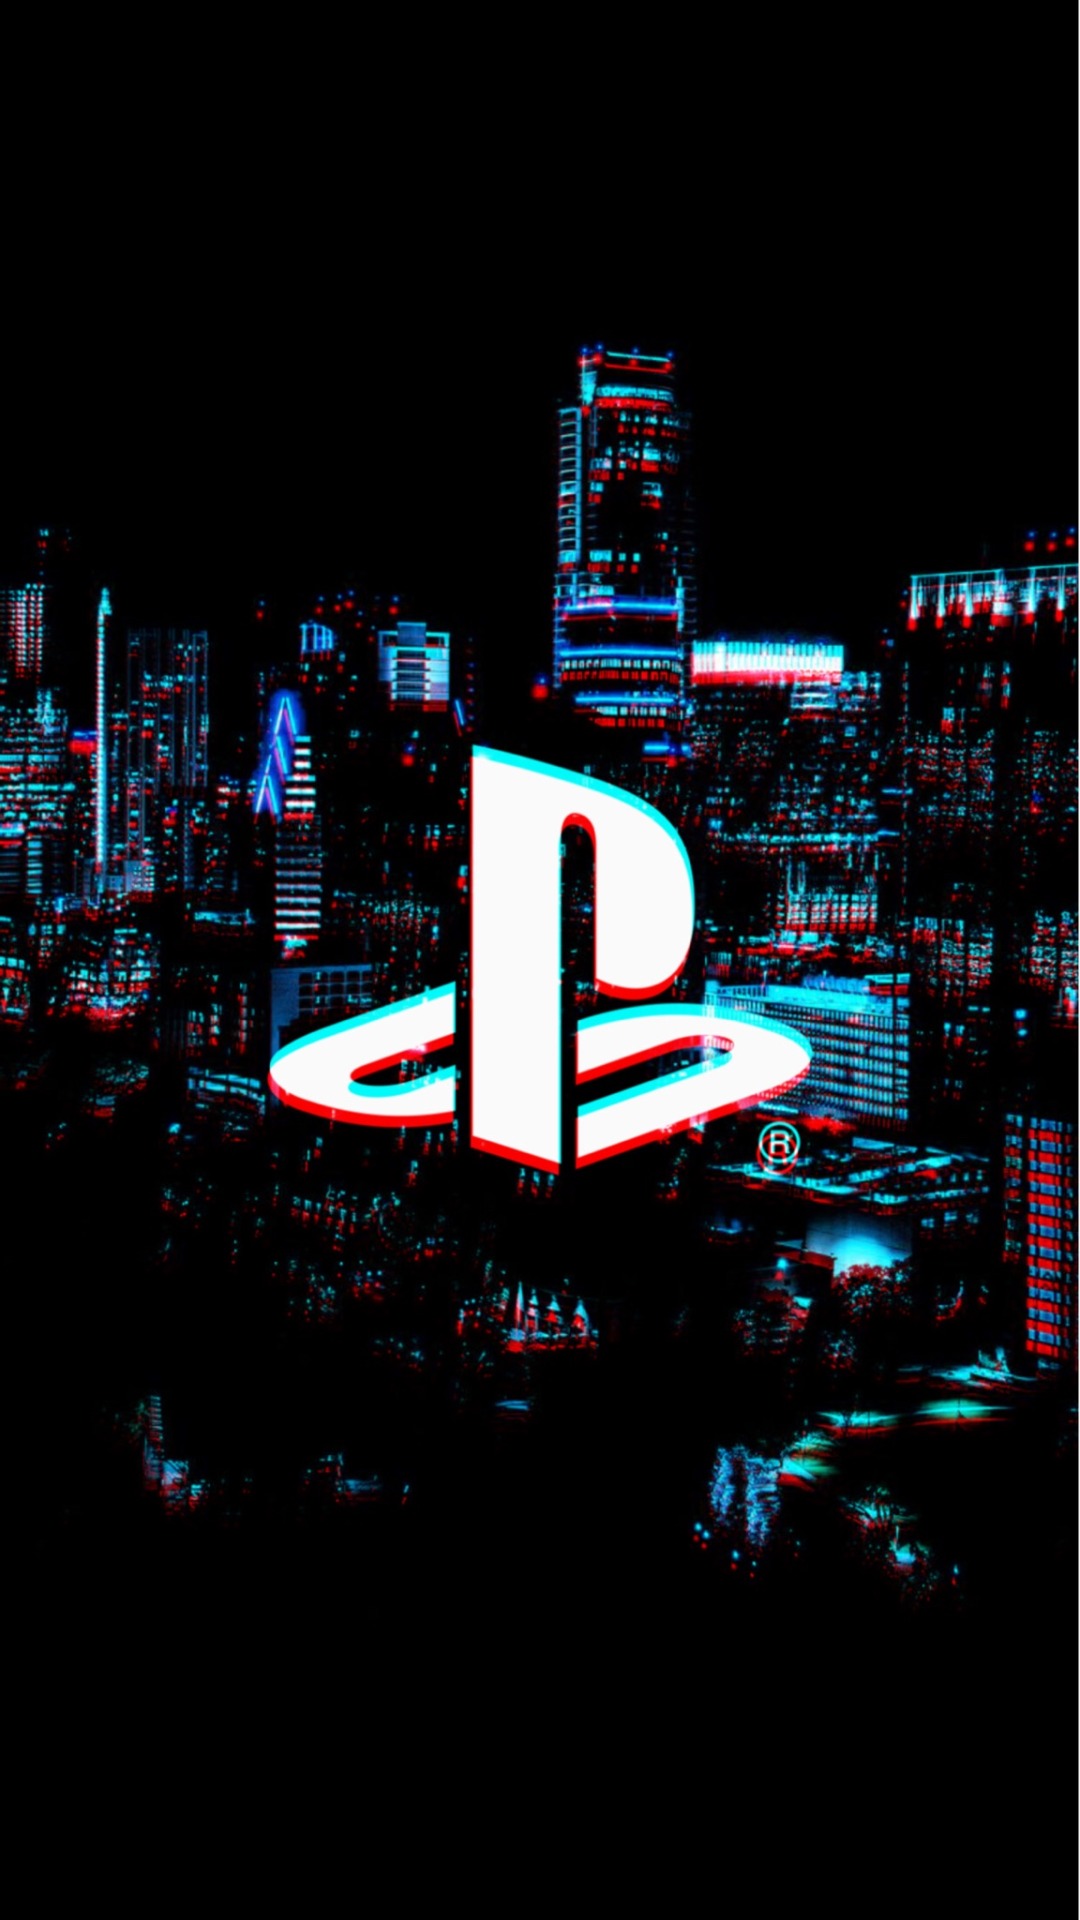 Aesthetic Ps4 Wallpaper : PS4 Aesthetic Wallpapers - Wallpaper Cave ...